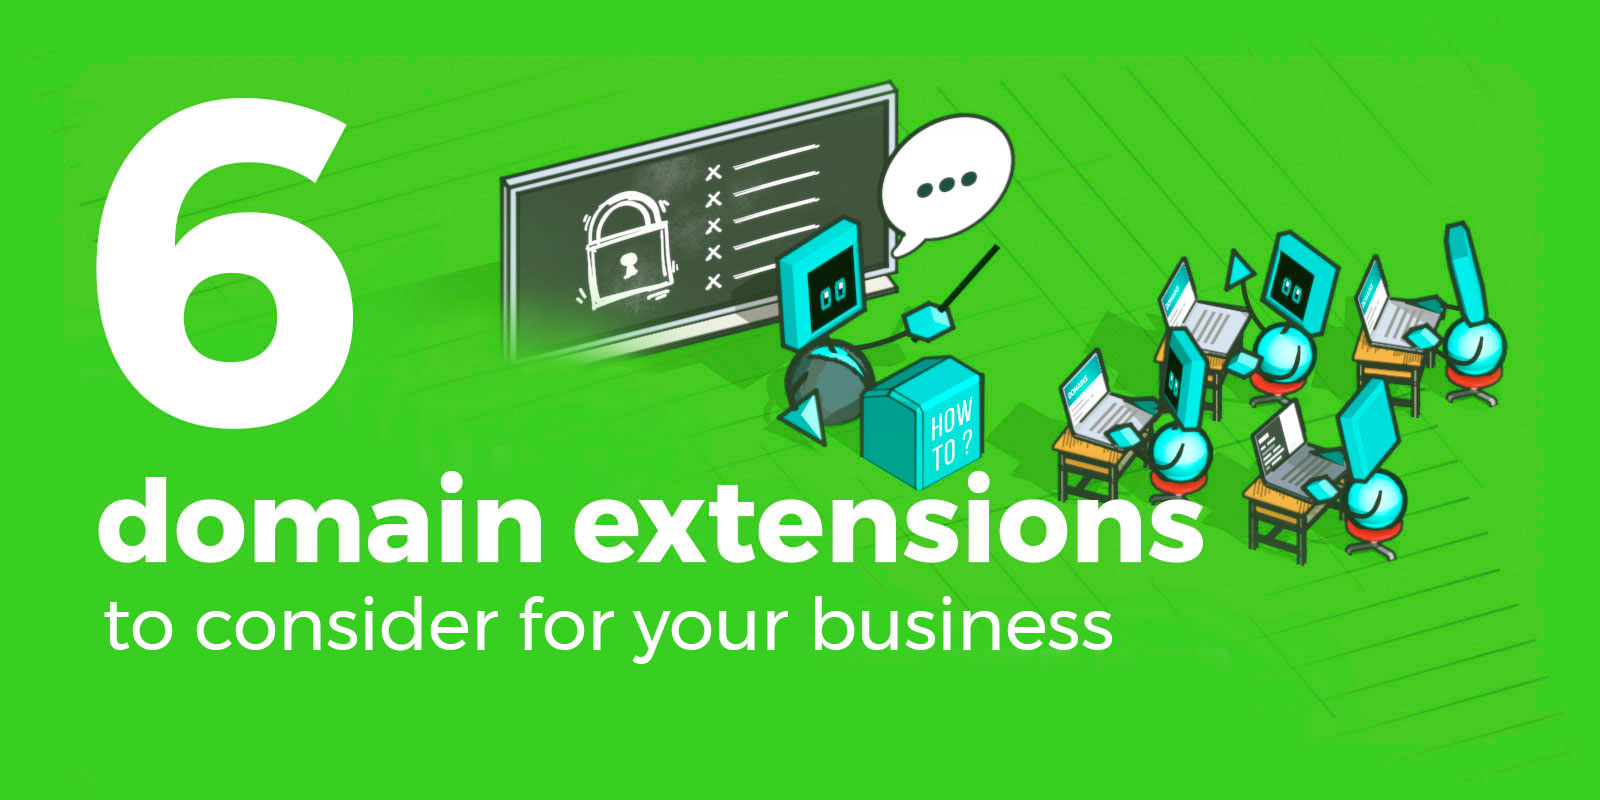 Six domain extensions to consider for your business